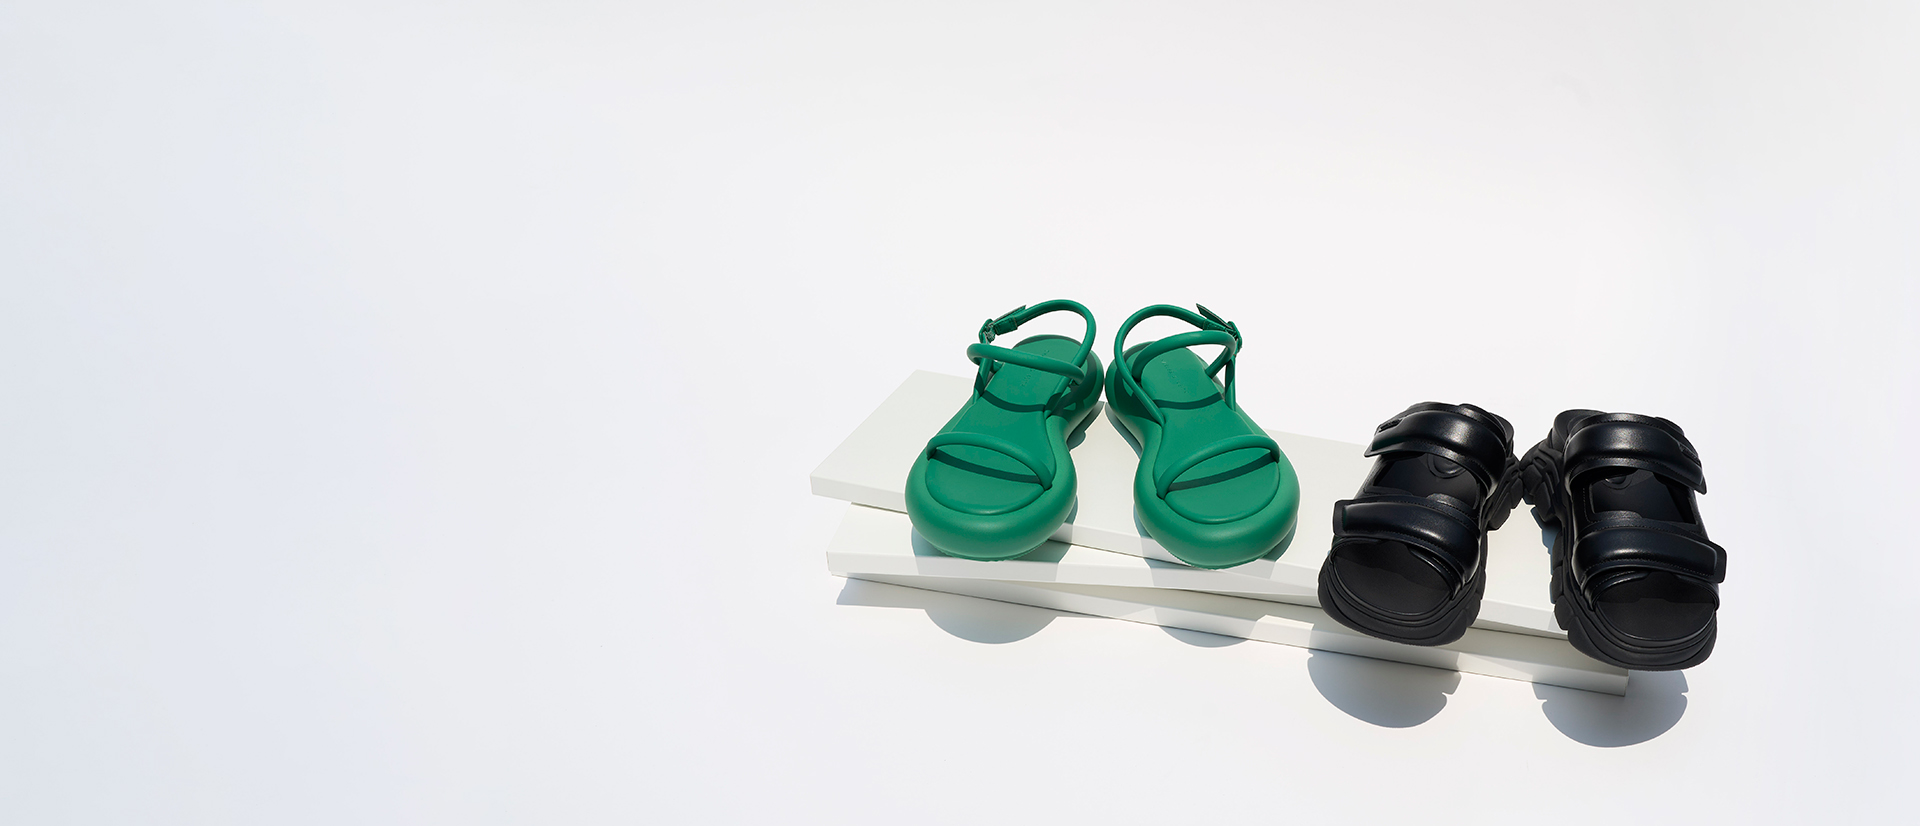 Women’s Keiko Padded Flatform Sandals in green and Dash Double Strap Slides in black - CHARLES & KEITH